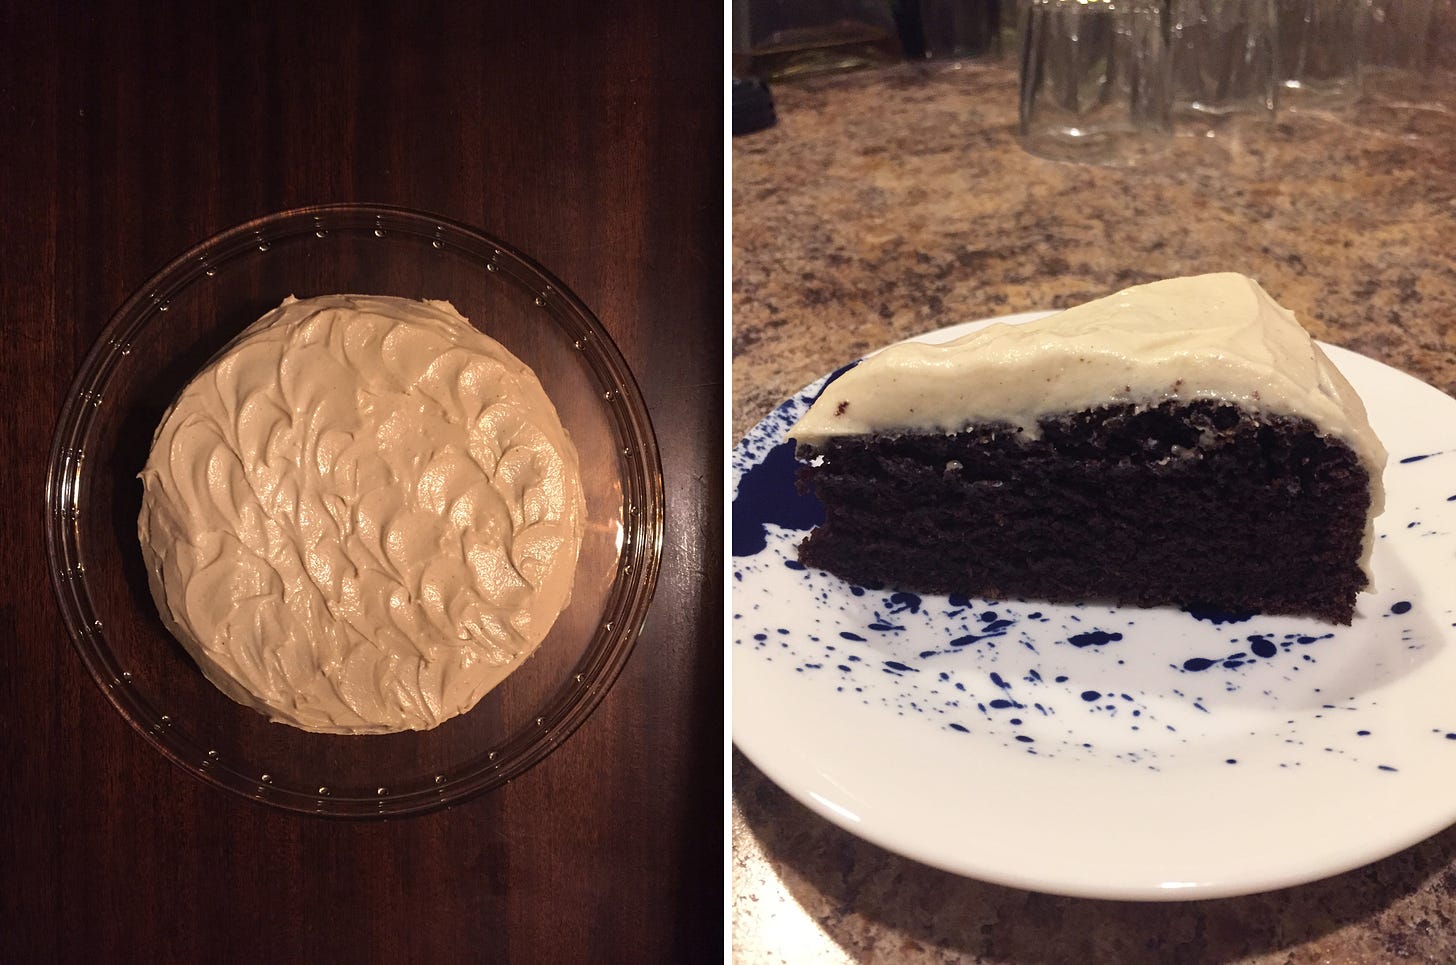 Left image: from above, a round cake on a clear glass cake plate on top of a wooden surface. The cake has cream-coloured icing in small decorative waves. Right image: a slice of cake on a blue and white plate. The interior is chocolate.